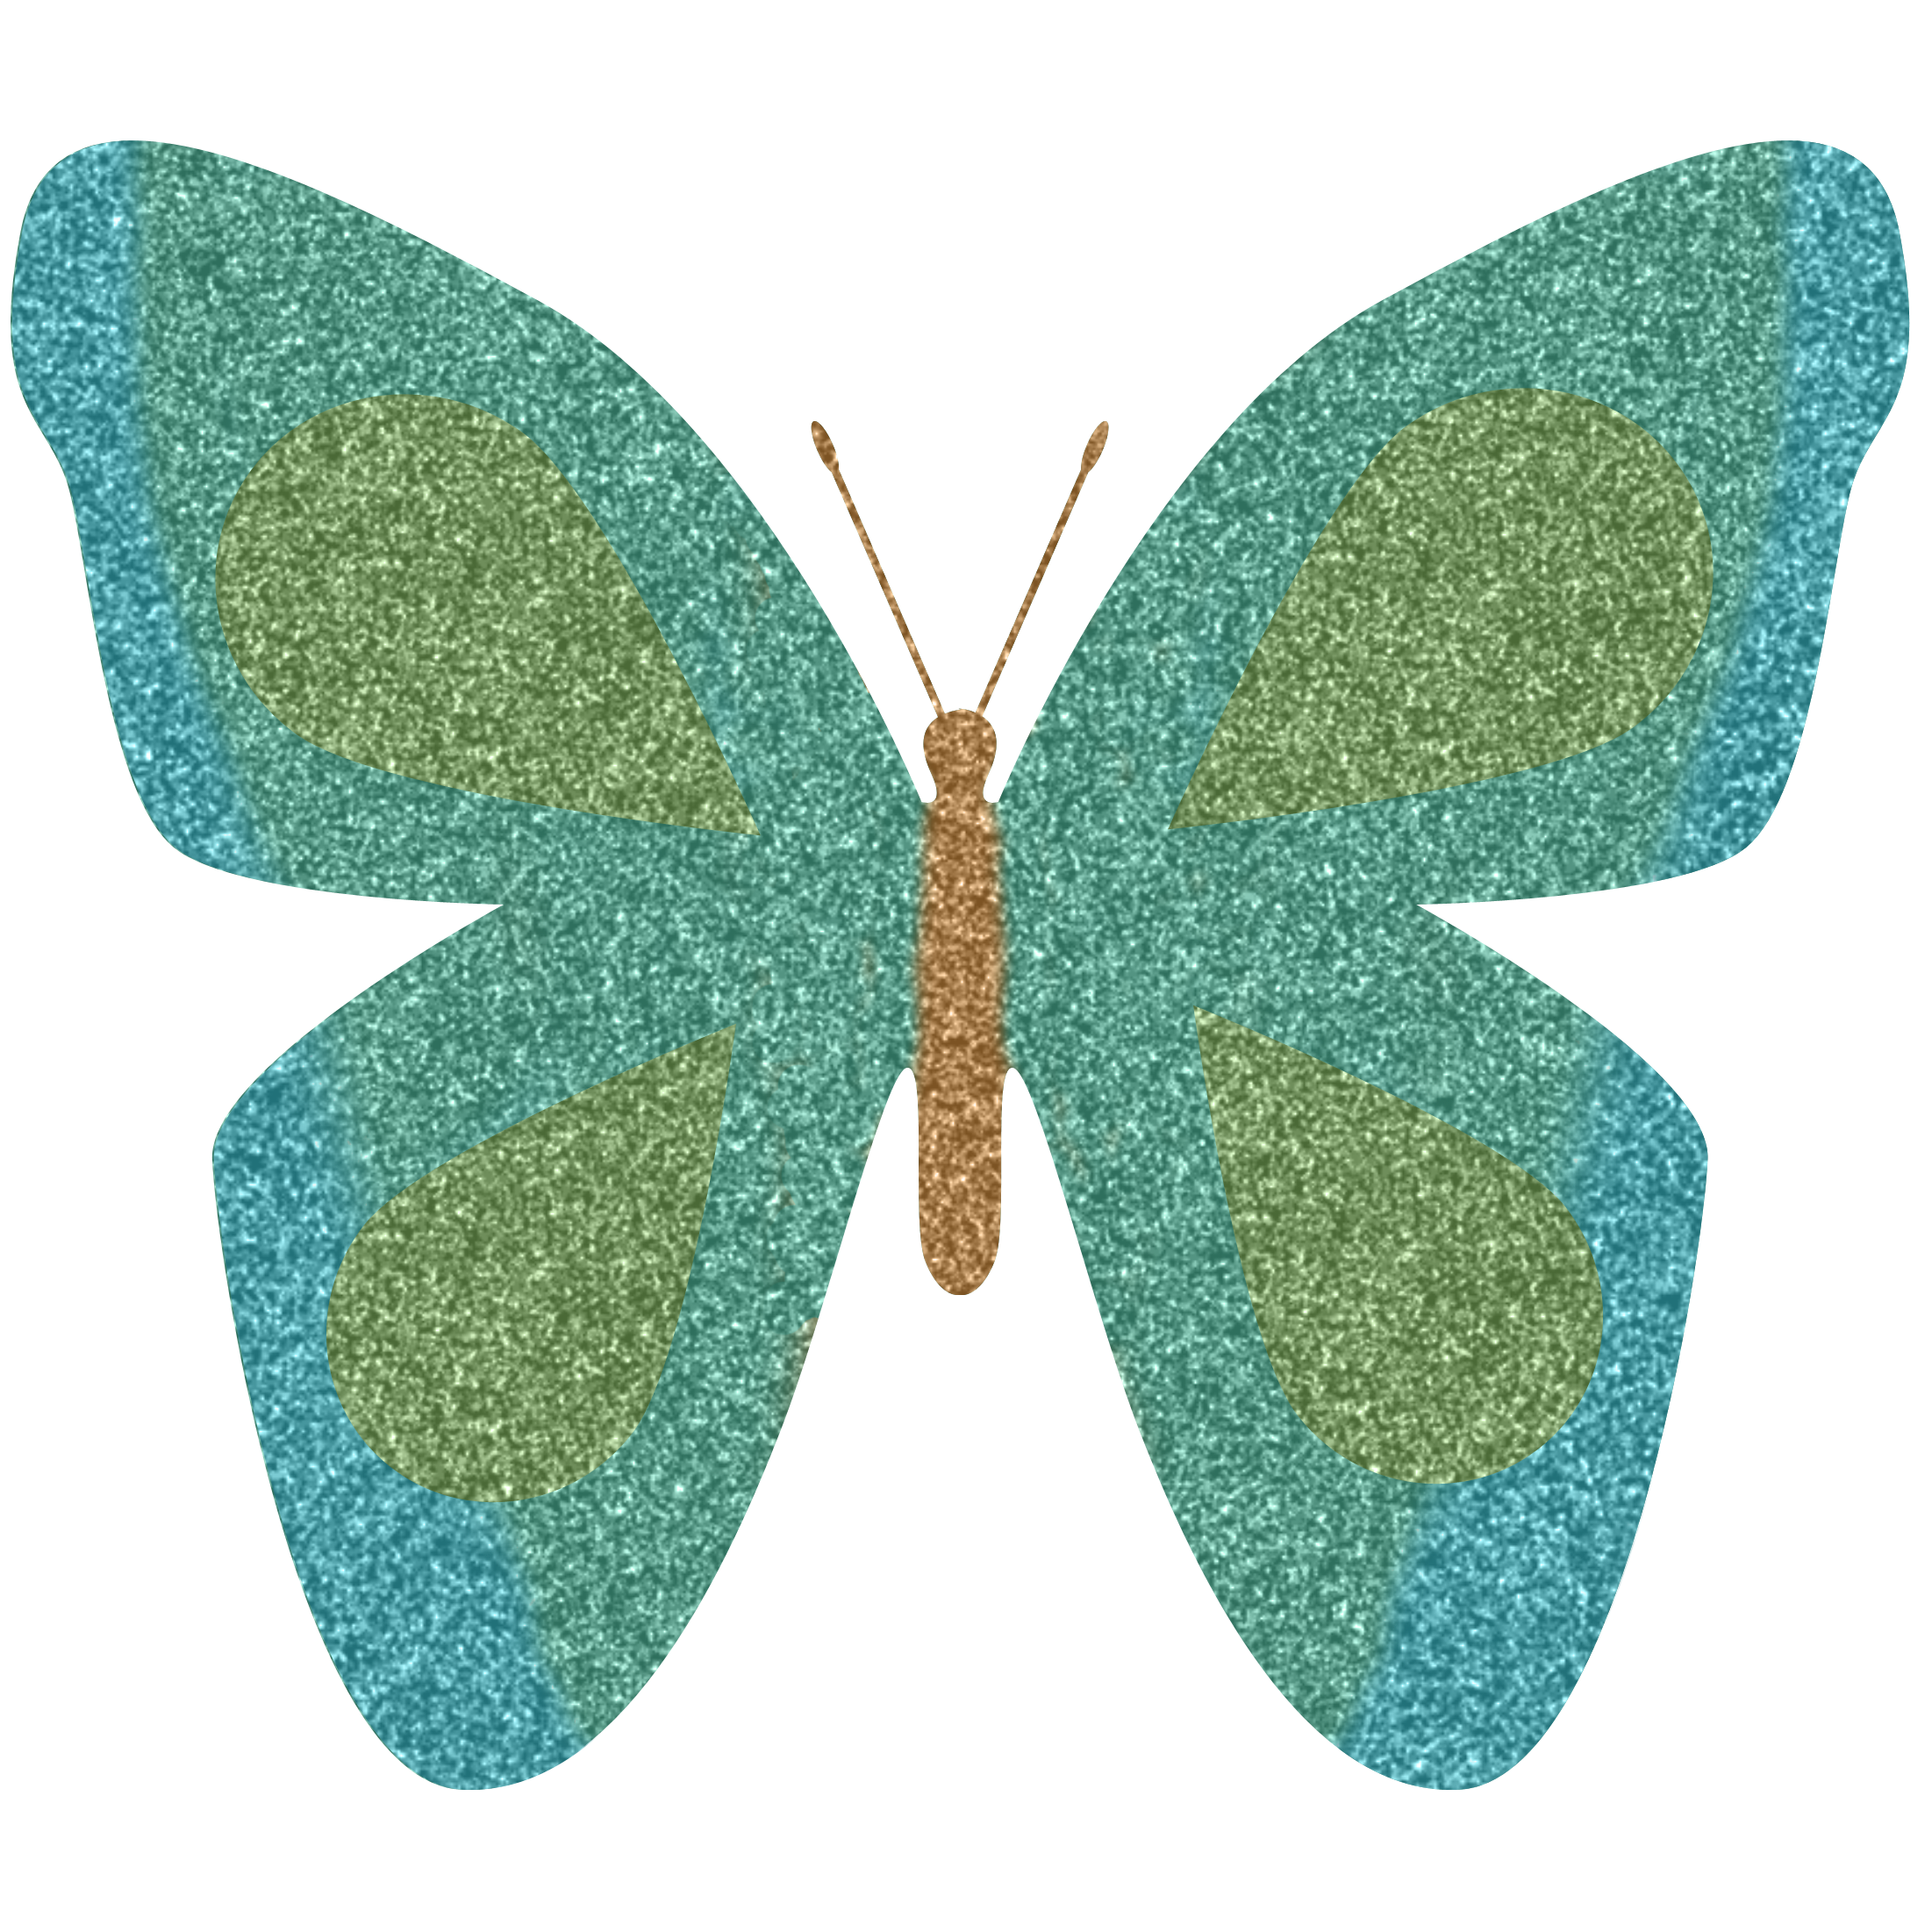 Sparkle clipart green. Glitter butterfly free 